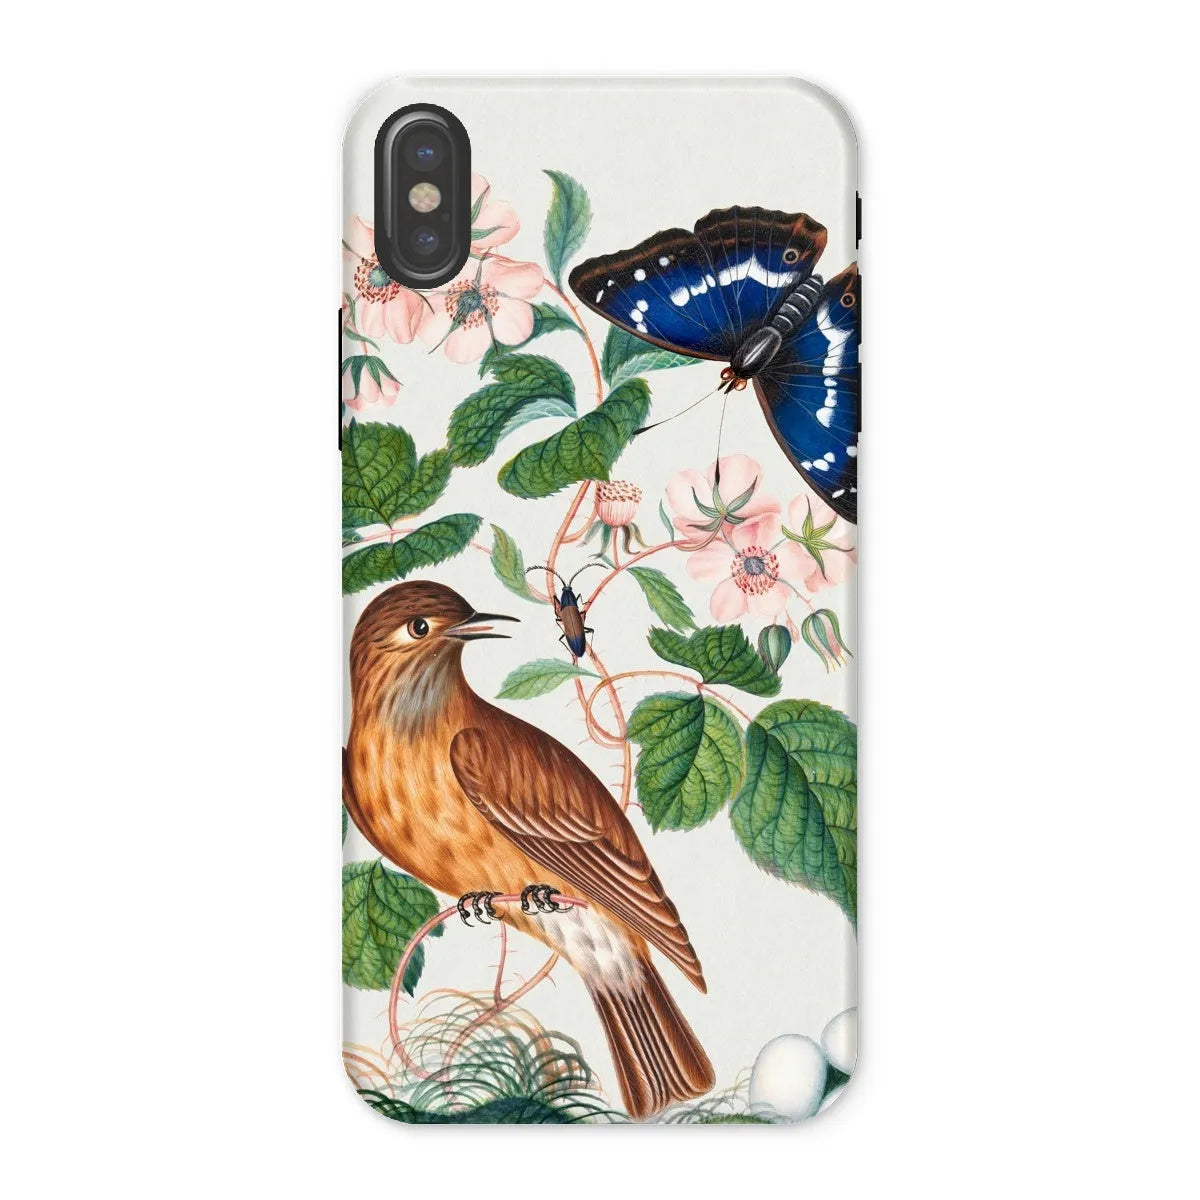 Flycatcher Emperor And Beetle - Art Phone Case - James Bolton - Iphone x / Matte - Mobile Phone Cases - Aesthetic Art